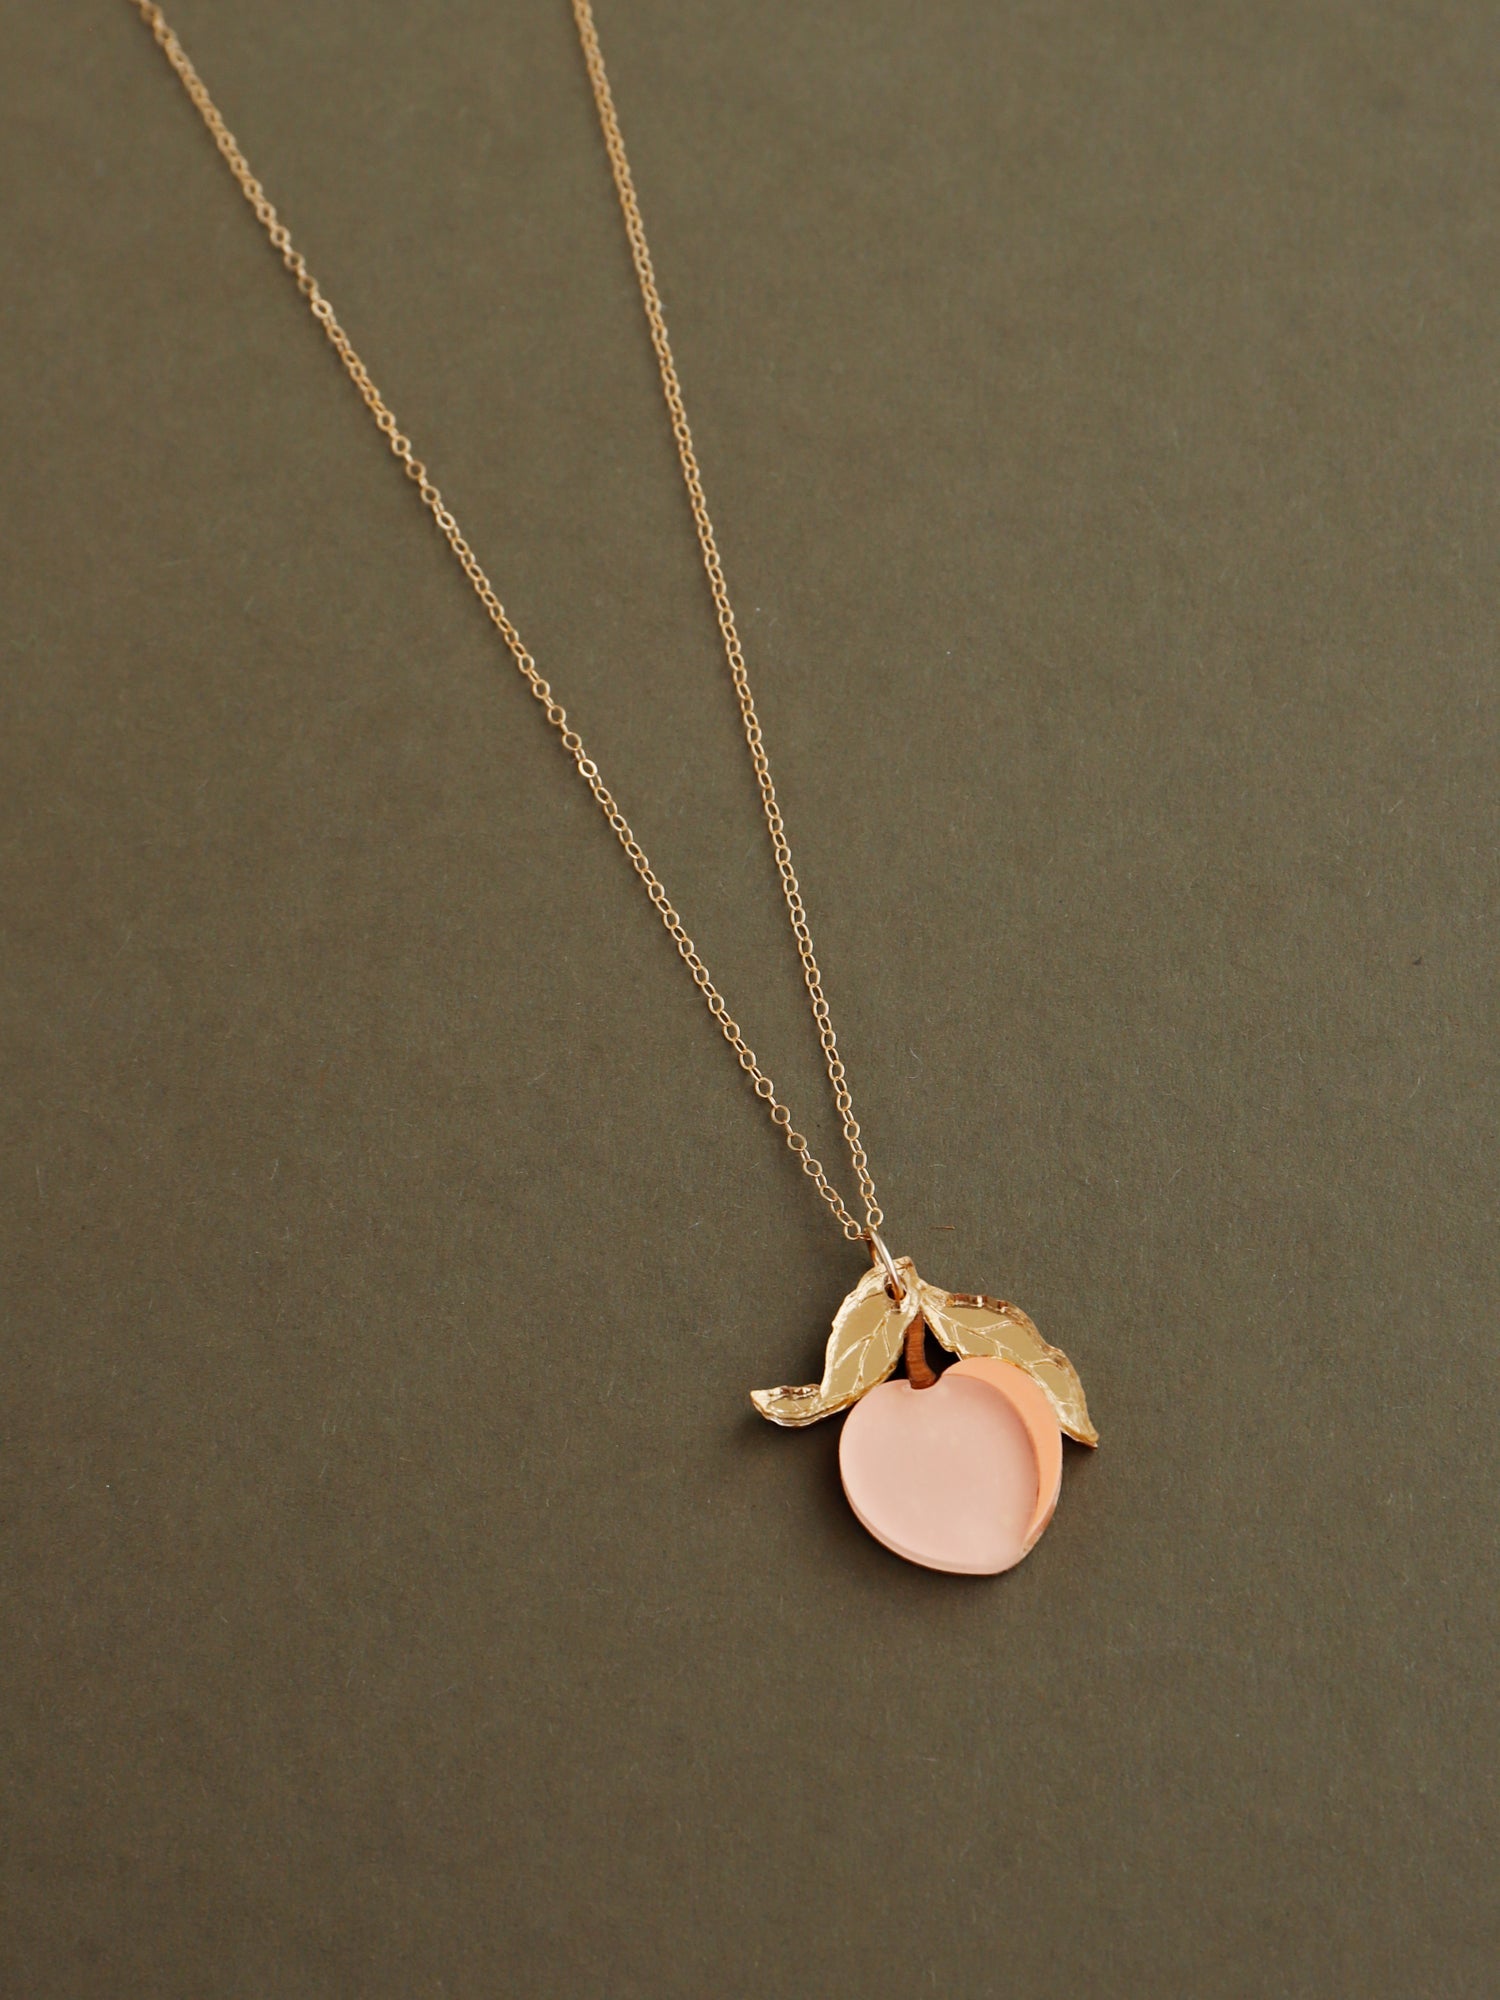 10. Mini Peach Necklace - No Chain/Pendant Only - Discontinued